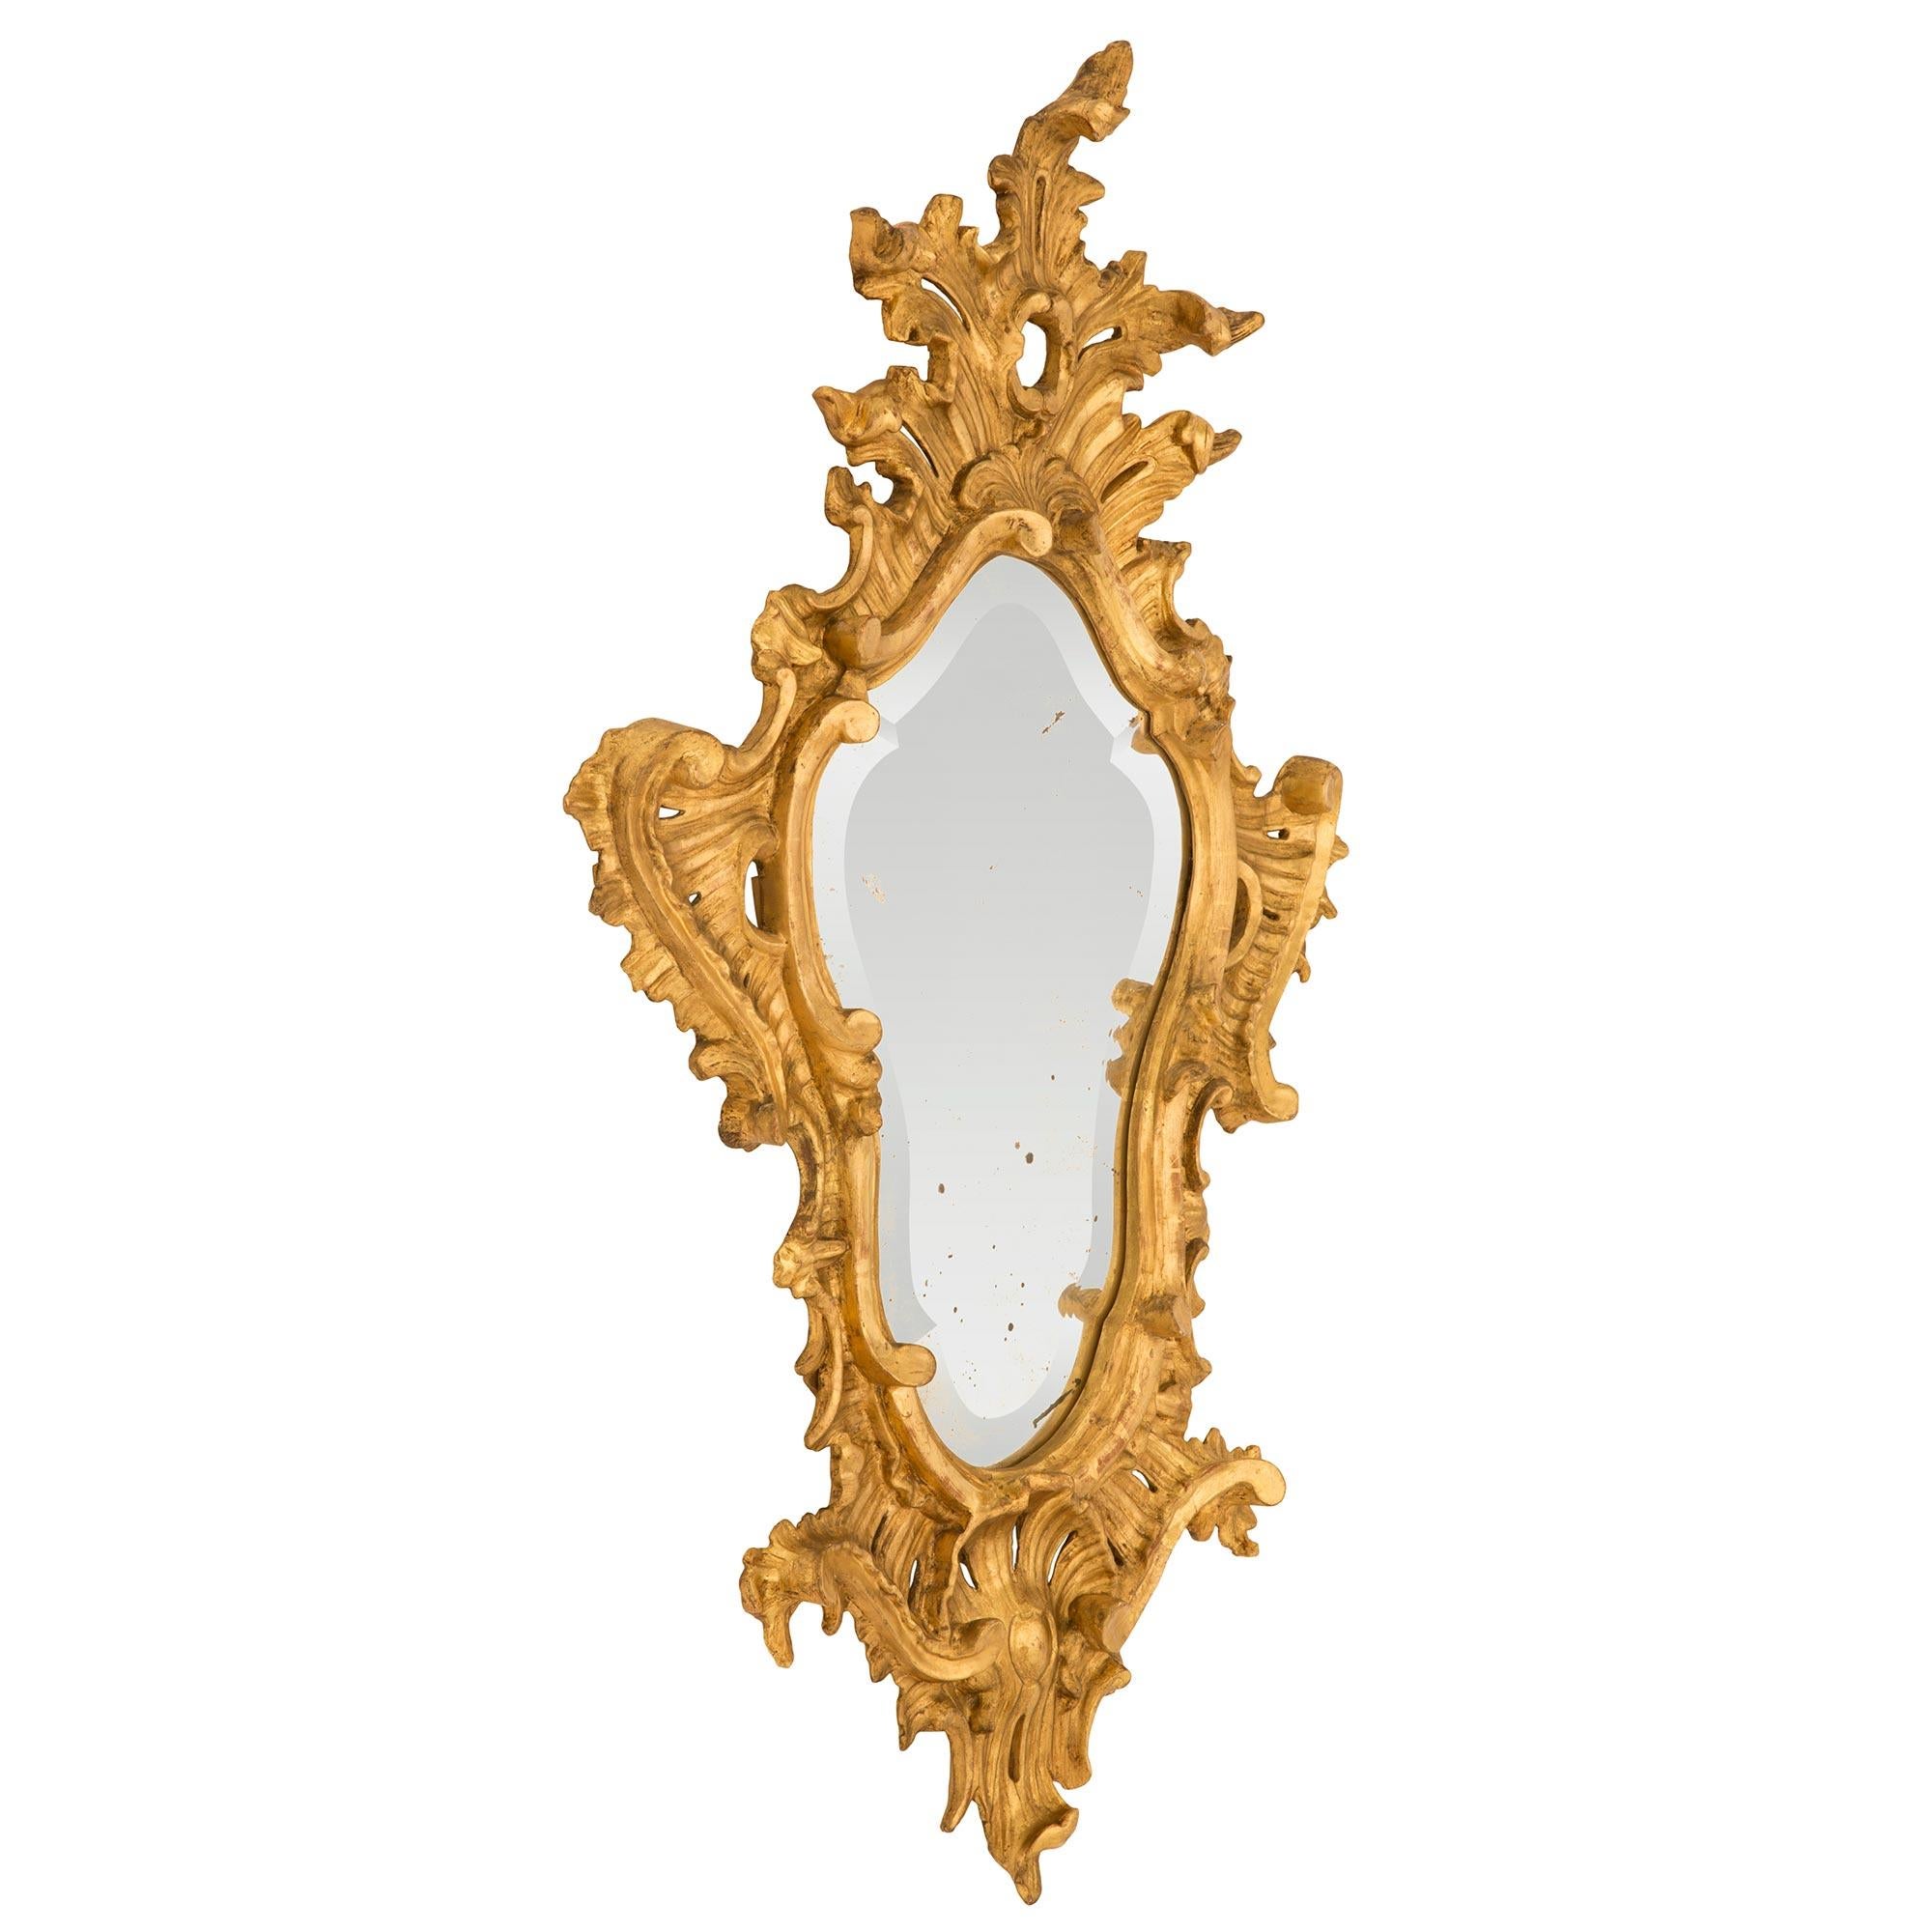 A striking pair of Italian 18th century Baroque period giltwood mirrors. Each mirror retains its original mirror plate with an exceptional and most decorative bevel following the charming scalloped shape of the frame. The frame displays stunning